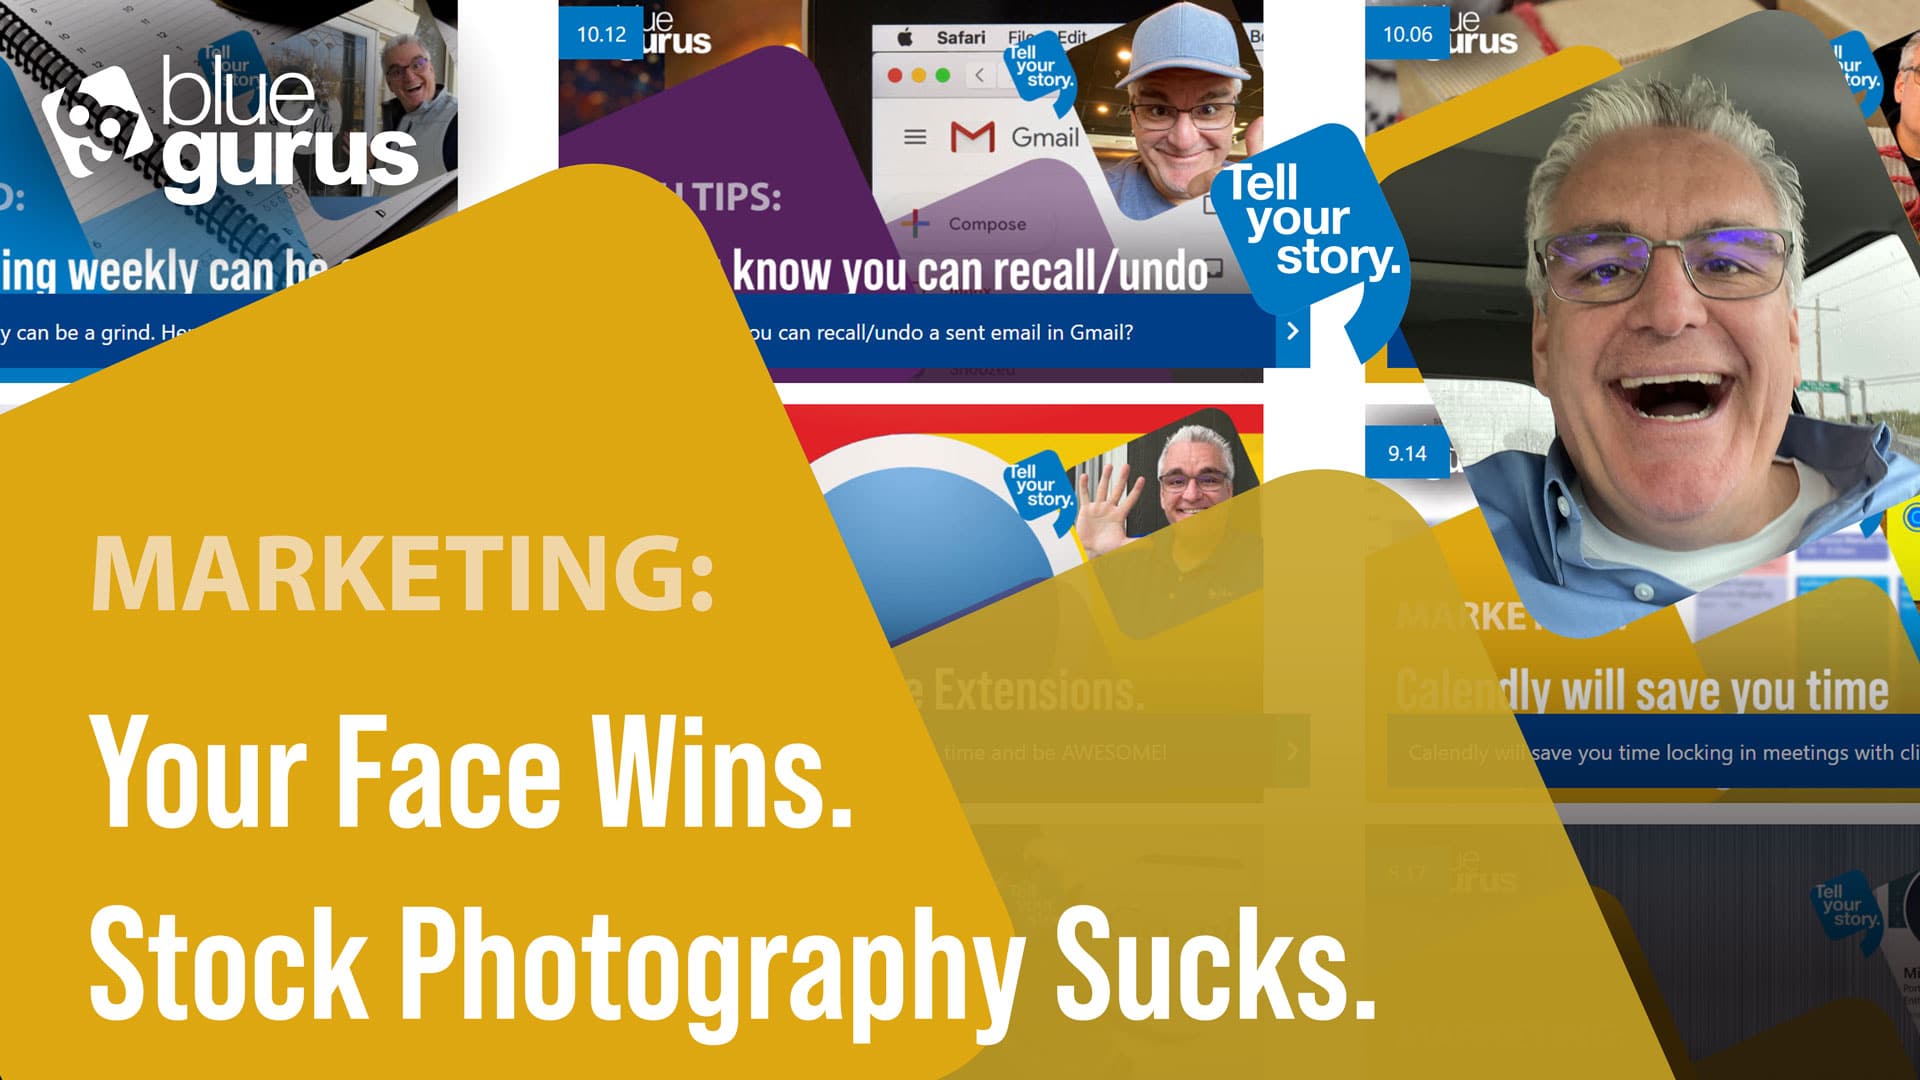 Your Face Wins. Stock Photography Sucks.